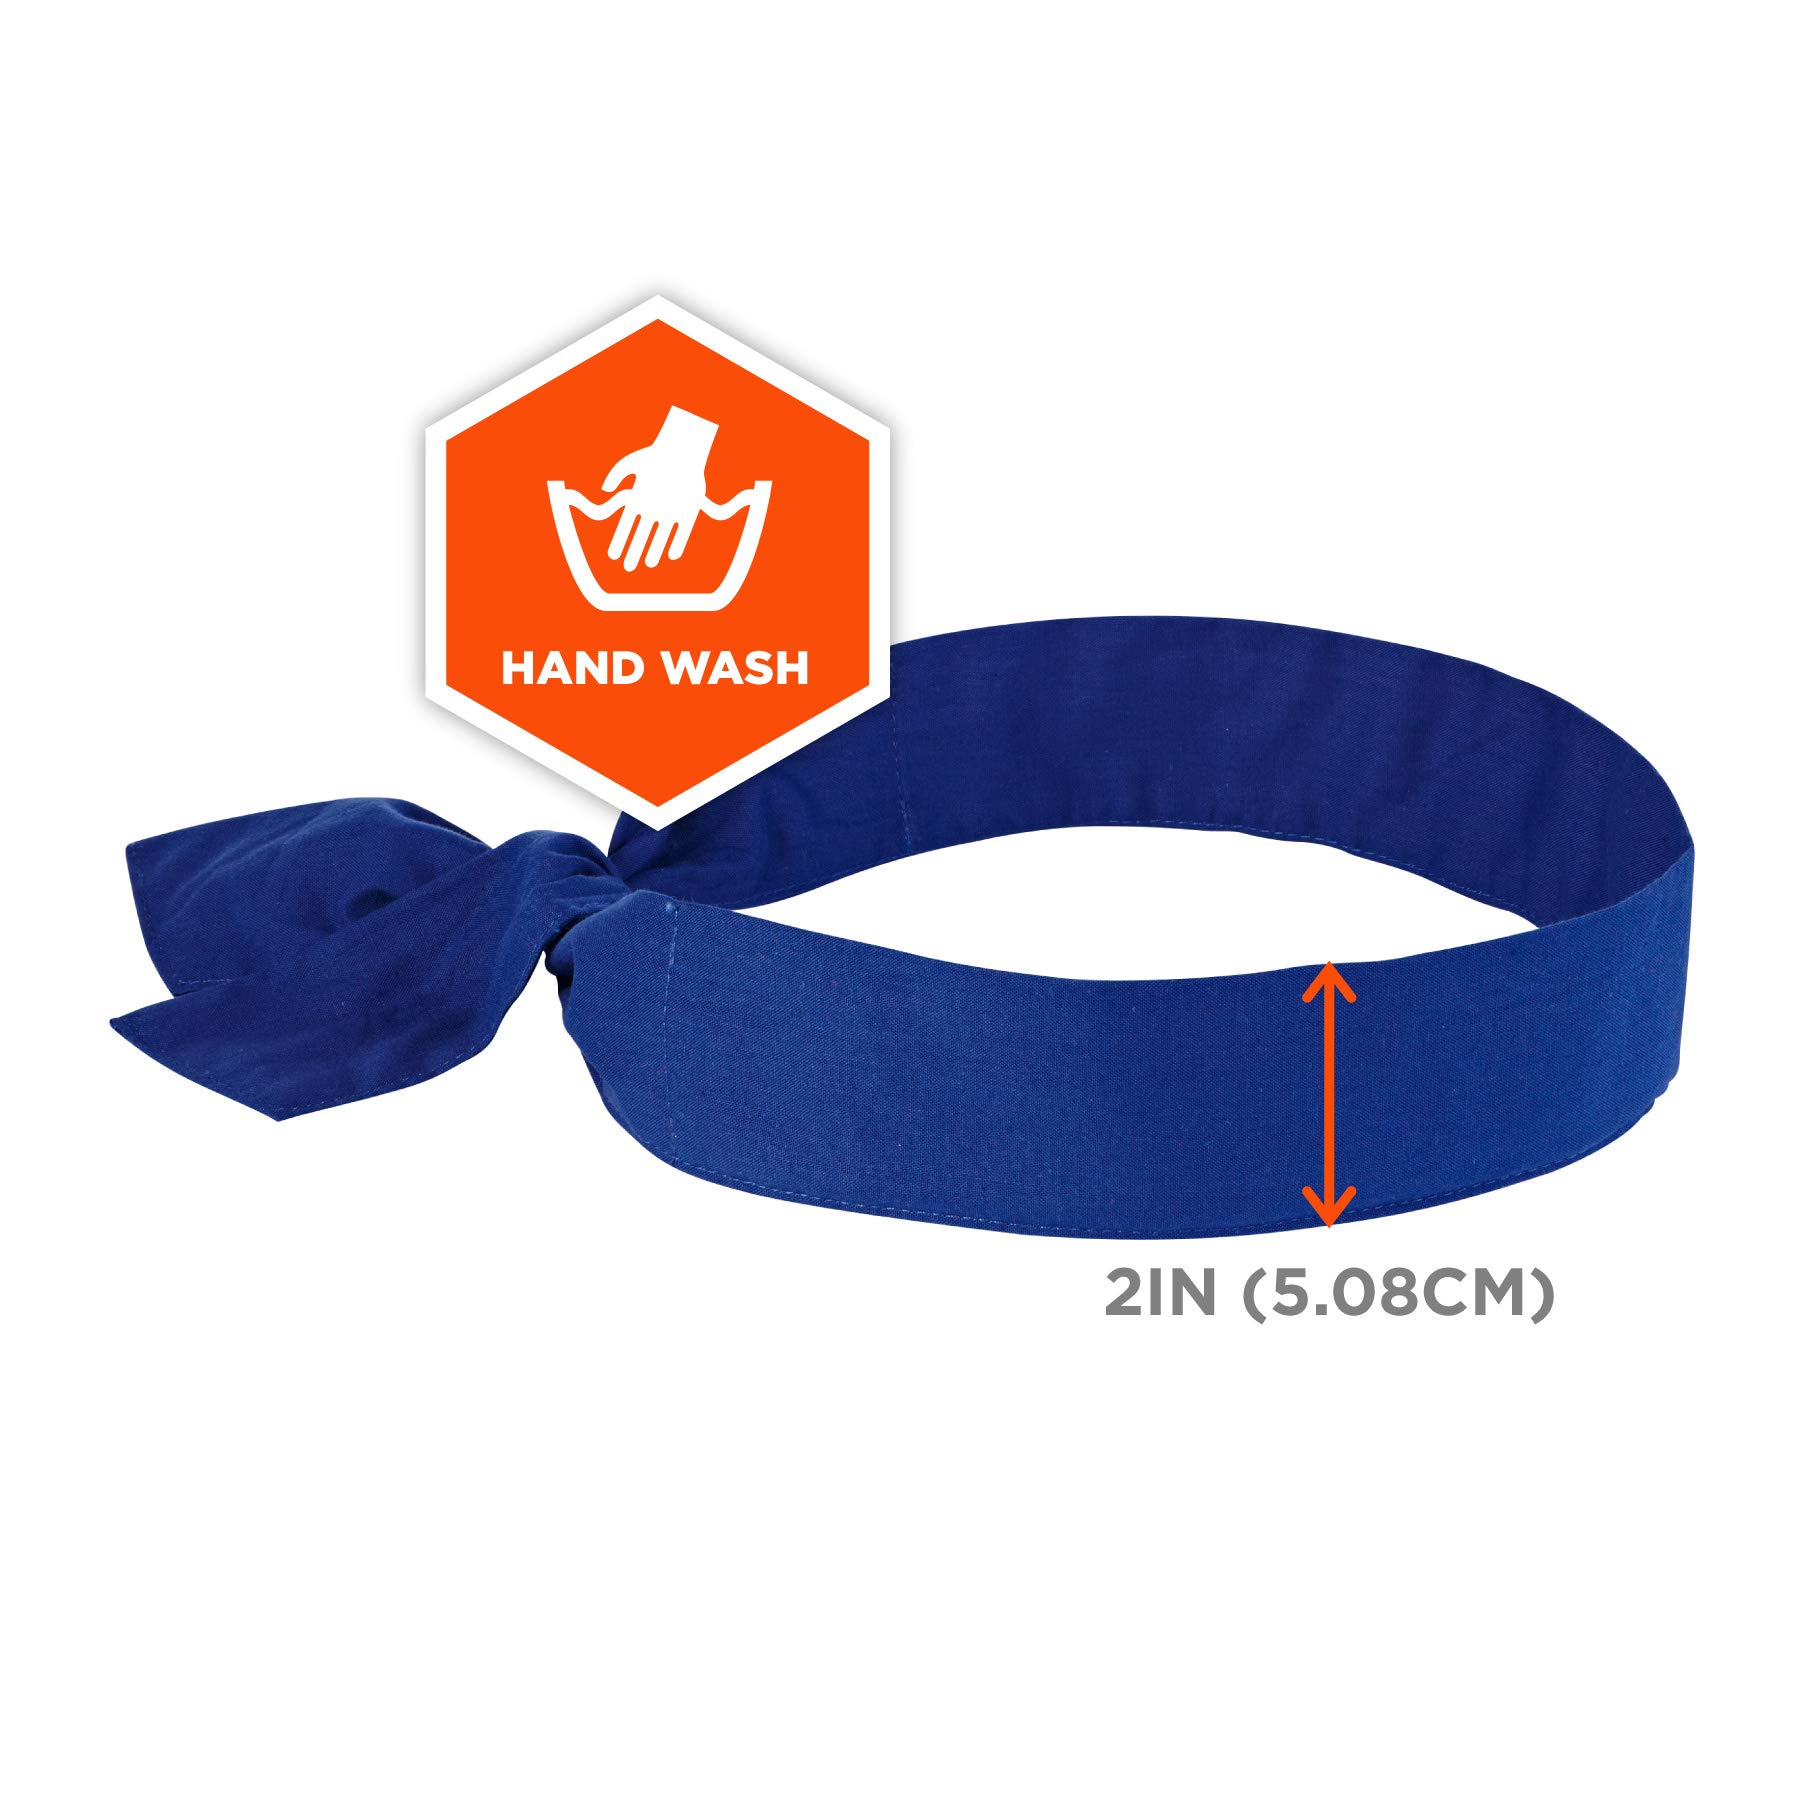 Ergodyne Chill Its 6700 Cooling Bandana, Evaporative Polymer Crystals for Cooling Relief, Tie for Adjustable Fit, Blue